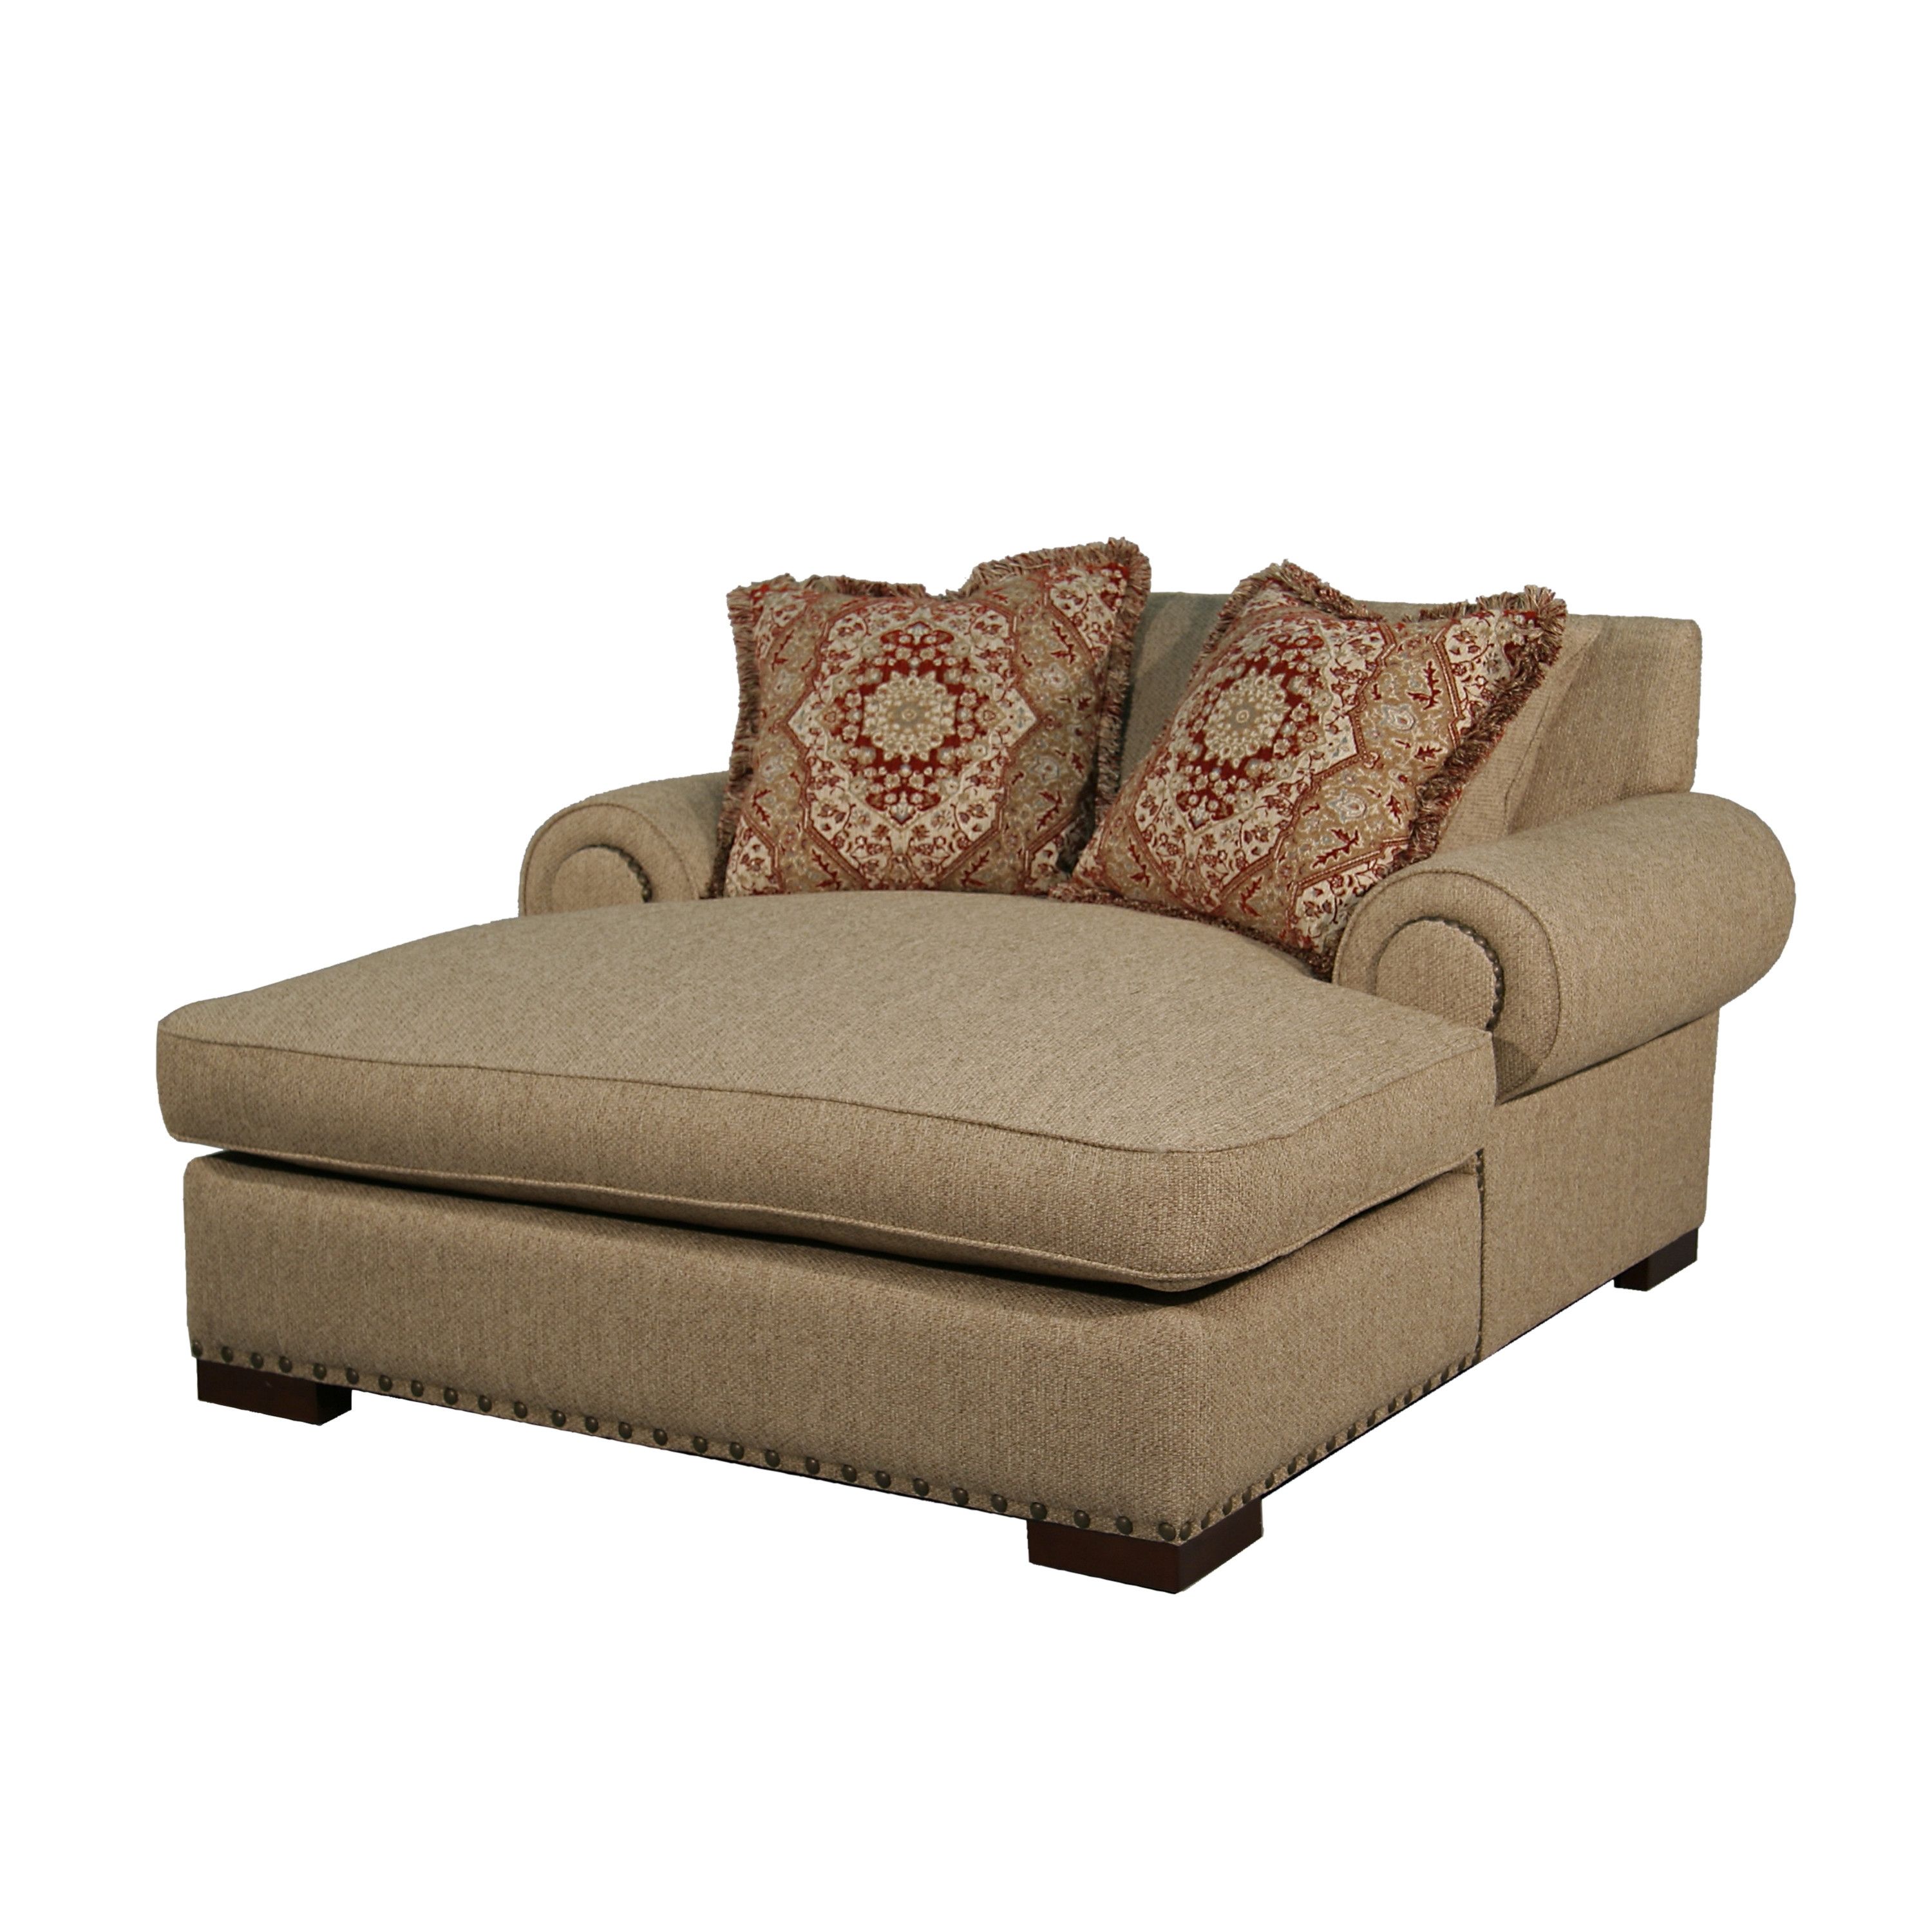 2 Person Chaise Lounge Chair • Lounge Chairs Ideas In Favorite Two Person Chaise Lounges (View 2 of 15)